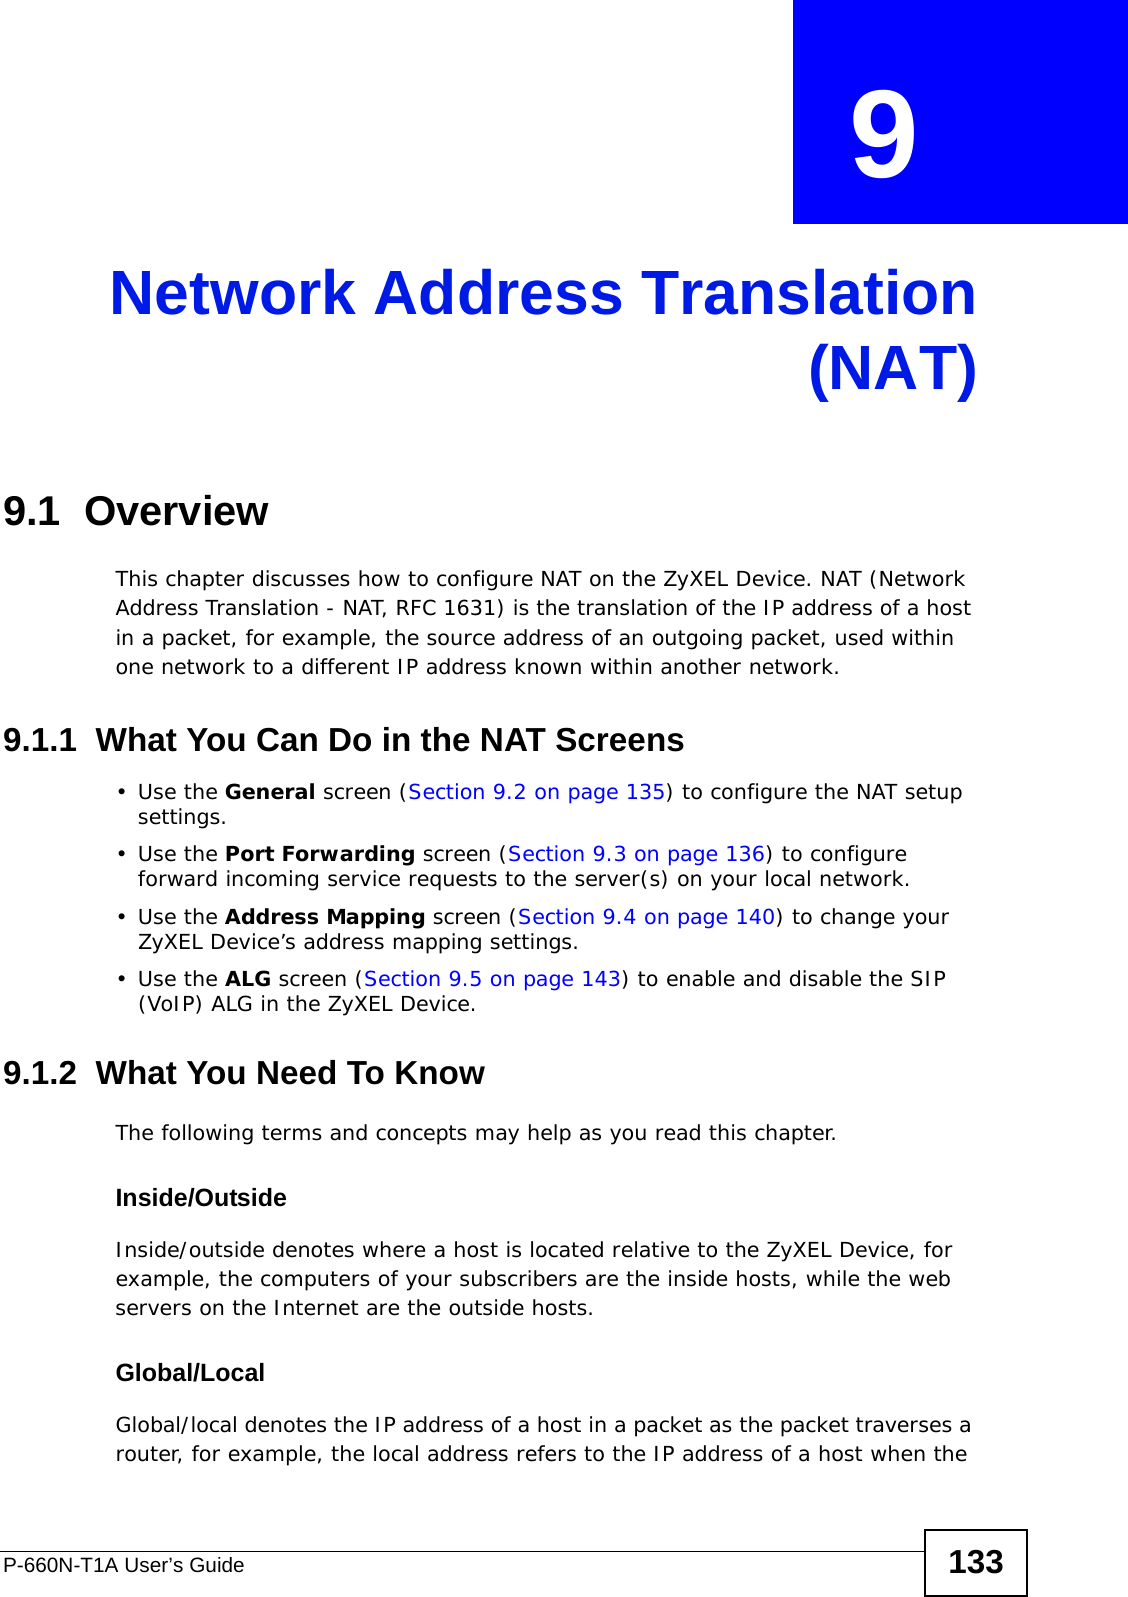 P-660N-T1A User’s Guide 133CHAPTER  9 Network Address Translation(NAT)9.1  OverviewThis chapter discusses how to configure NAT on the ZyXEL Device. NAT (Network Address Translation - NAT, RFC 1631) is the translation of the IP address of a host in a packet, for example, the source address of an outgoing packet, used within one network to a different IP address known within another network.9.1.1  What You Can Do in the NAT Screens•Use the General screen (Section 9.2 on page 135) to configure the NAT setup settings.•Use the Port Forwarding screen (Section 9.3 on page 136) to configure forward incoming service requests to the server(s) on your local network. •Use the Address Mapping screen (Section 9.4 on page 140) to change your ZyXEL Device’s address mapping settings.•Use the ALG screen (Section 9.5 on page 143) to enable and disable the SIP (VoIP) ALG in the ZyXEL Device.9.1.2  What You Need To KnowThe following terms and concepts may help as you read this chapter.Inside/OutsideInside/outside denotes where a host is located relative to the ZyXEL Device, for example, the computers of your subscribers are the inside hosts, while the web servers on the Internet are the outside hosts. Global/LocalGlobal/local denotes the IP address of a host in a packet as the packet traverses a router, for example, the local address refers to the IP address of a host when the 